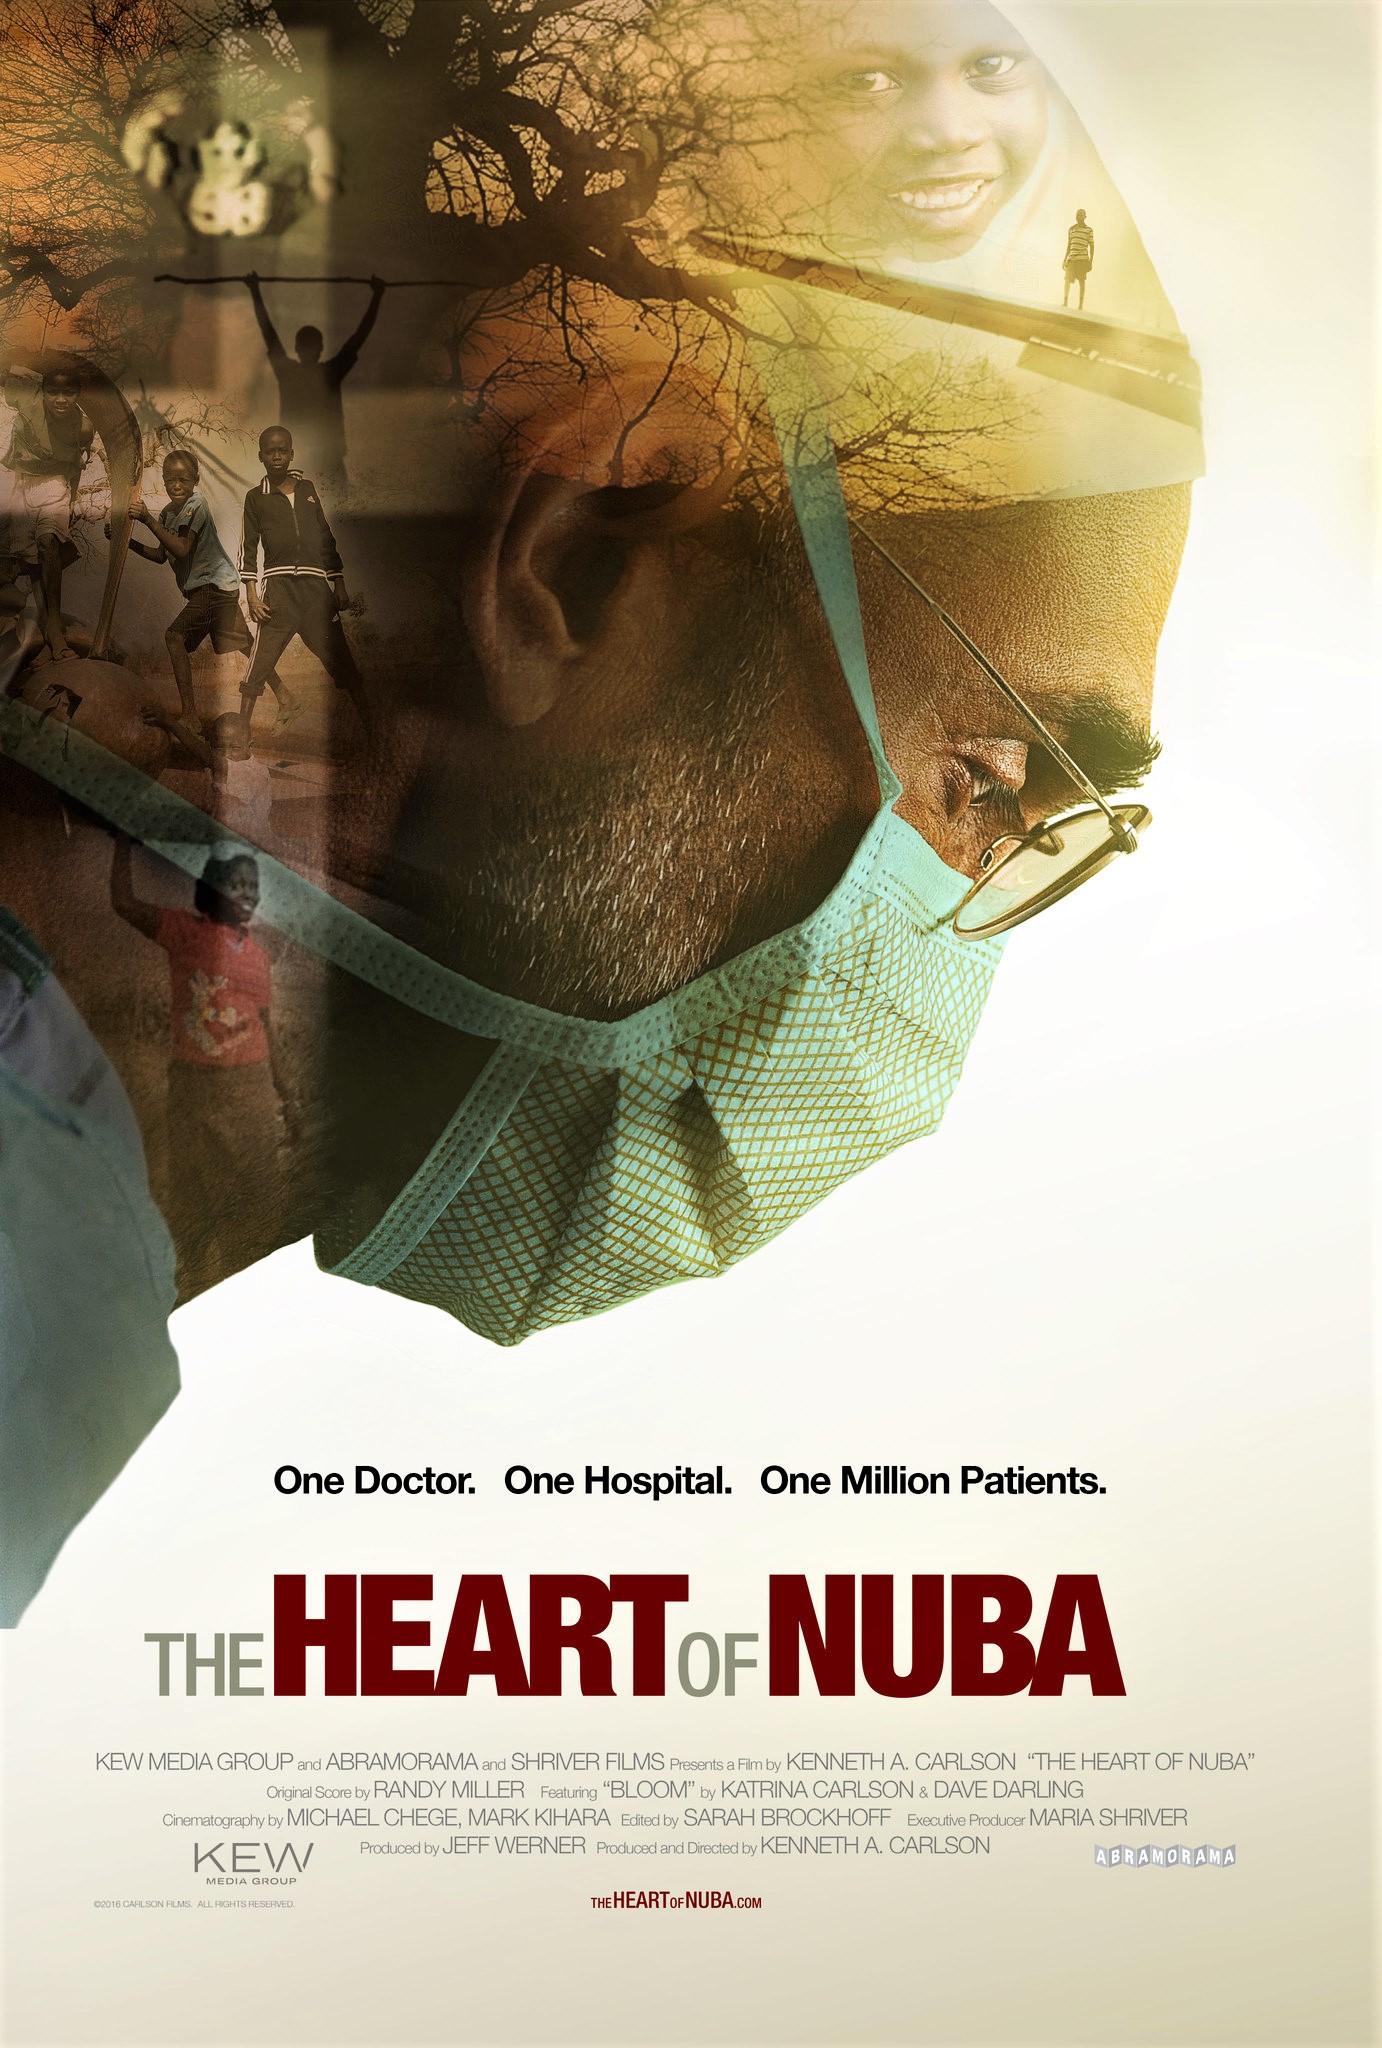 Image promoting The Heart of Nuba, a documentary film about Dr. Tom Catena.